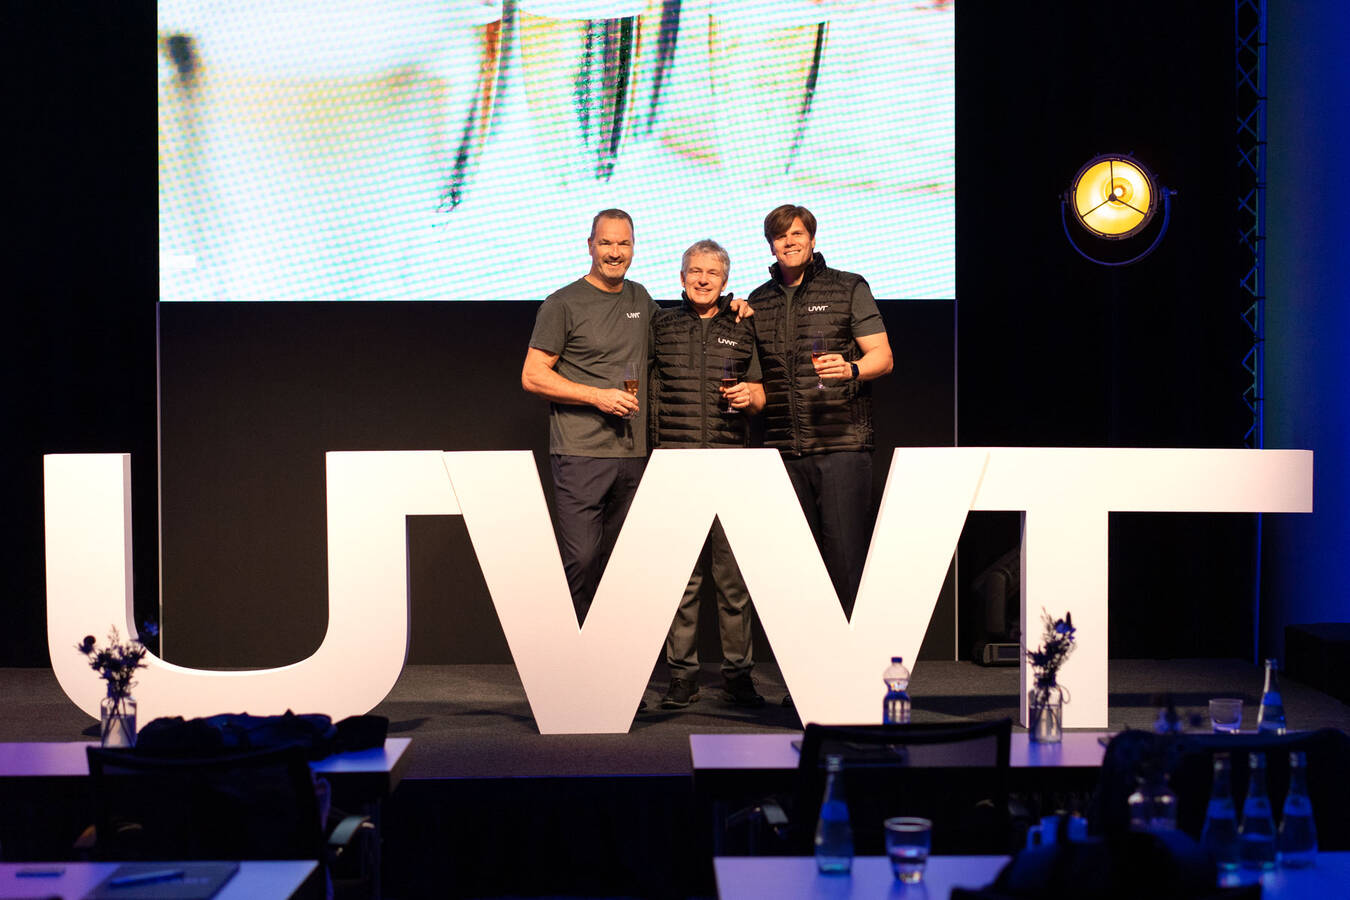 Let´s start the new chapter of the UWT brand TECHNOLOGY. PERFORMANCE. PARTNERSHIP.
The UWT Family and presented its new brand story at its ”7th International Sales Meeting 2023”, showing that we are ready for more worldwide